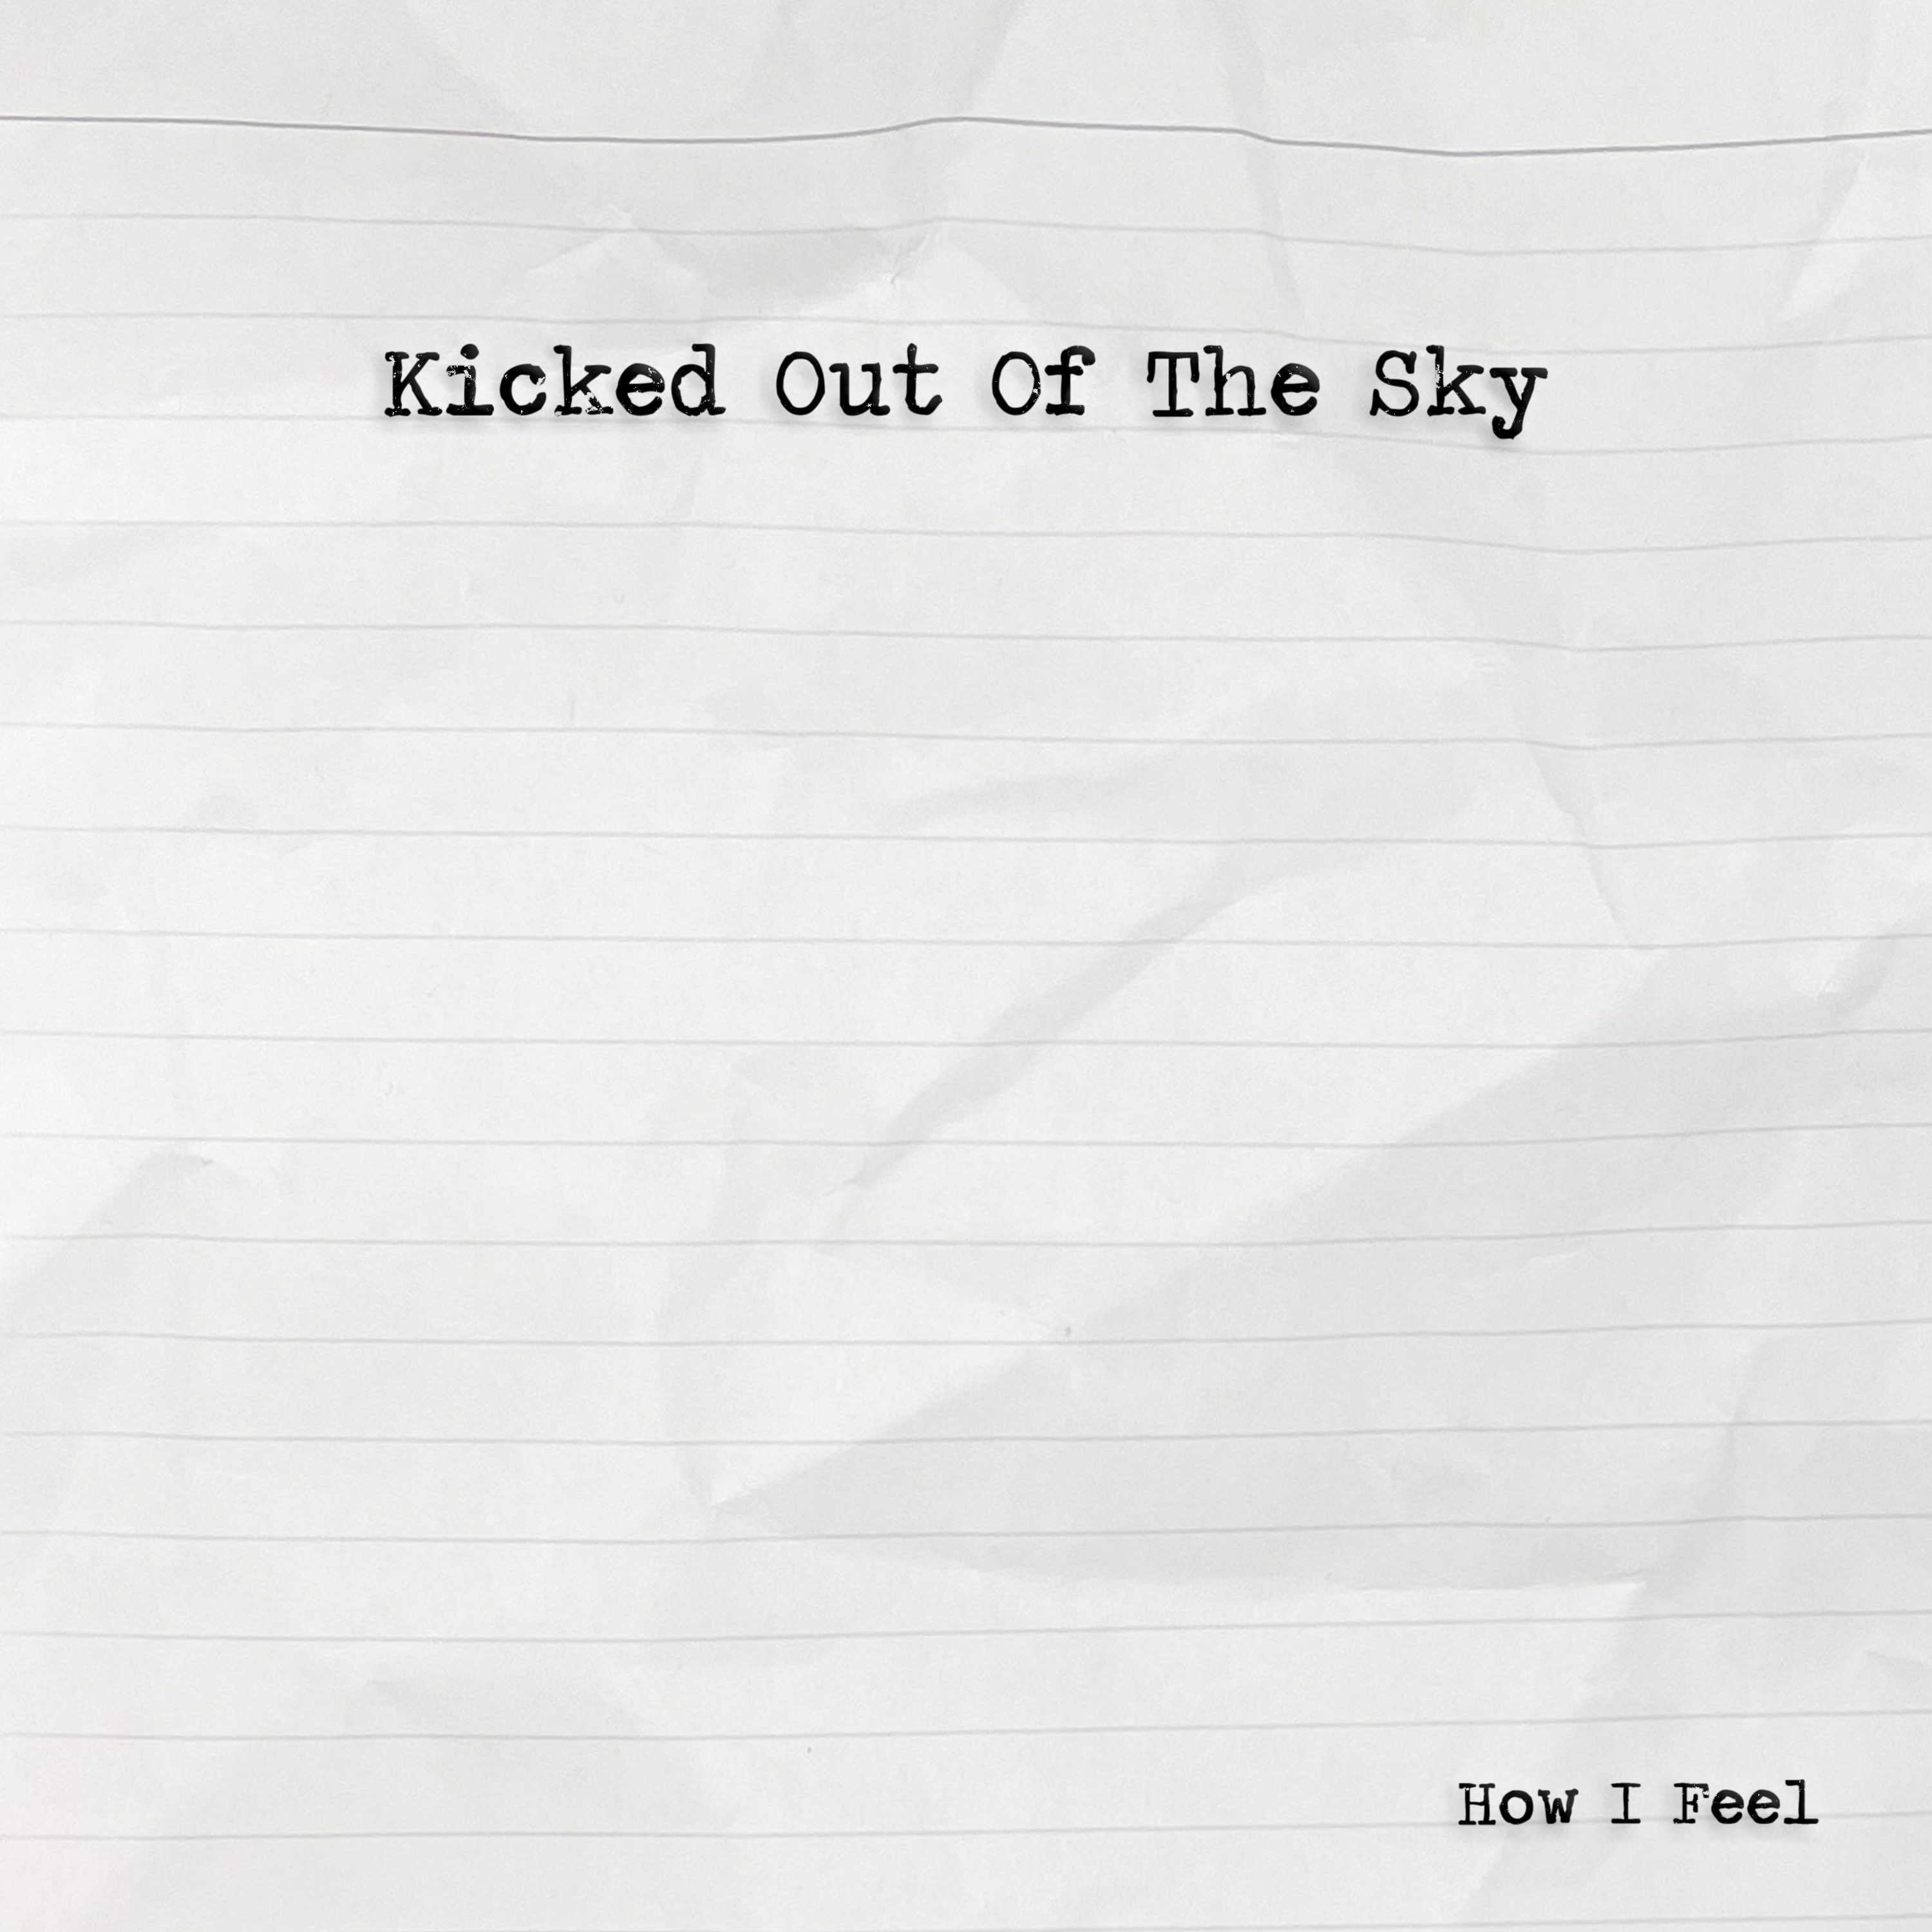 Art for How I Feel by Kicked Out Of The Sky